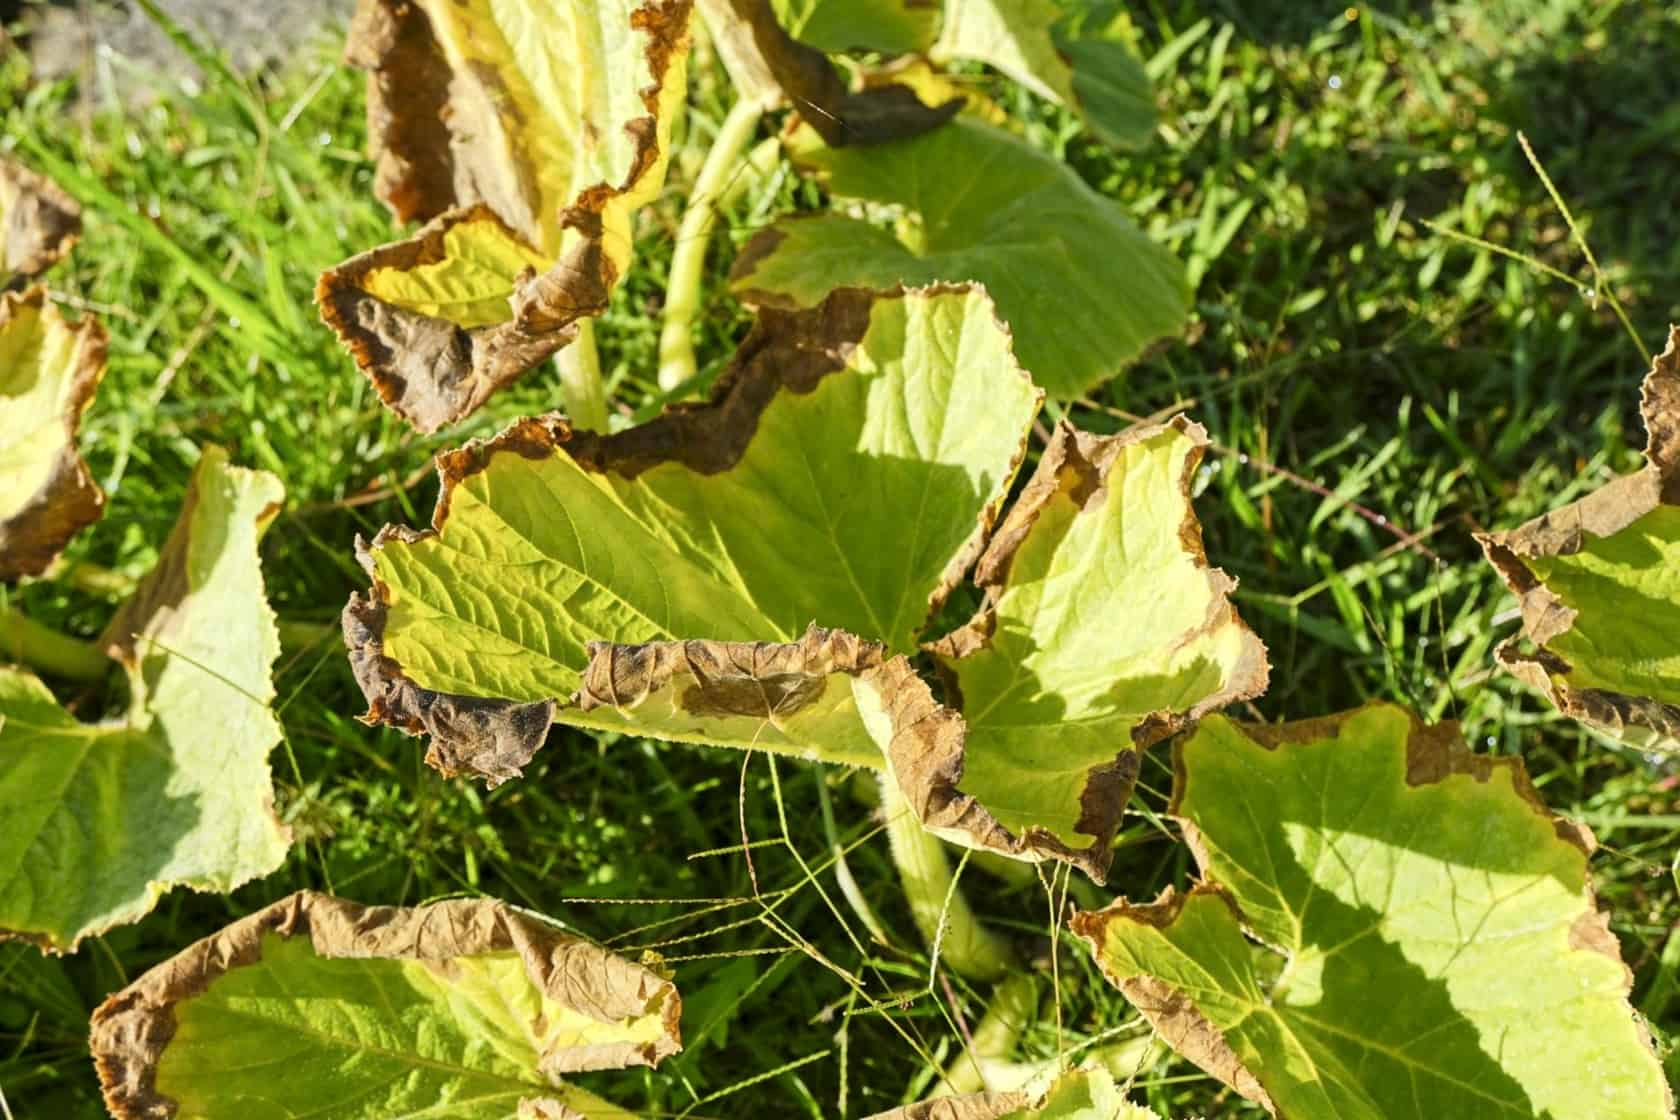 Leaves dying on a giant pumpkin plant after a hot summer